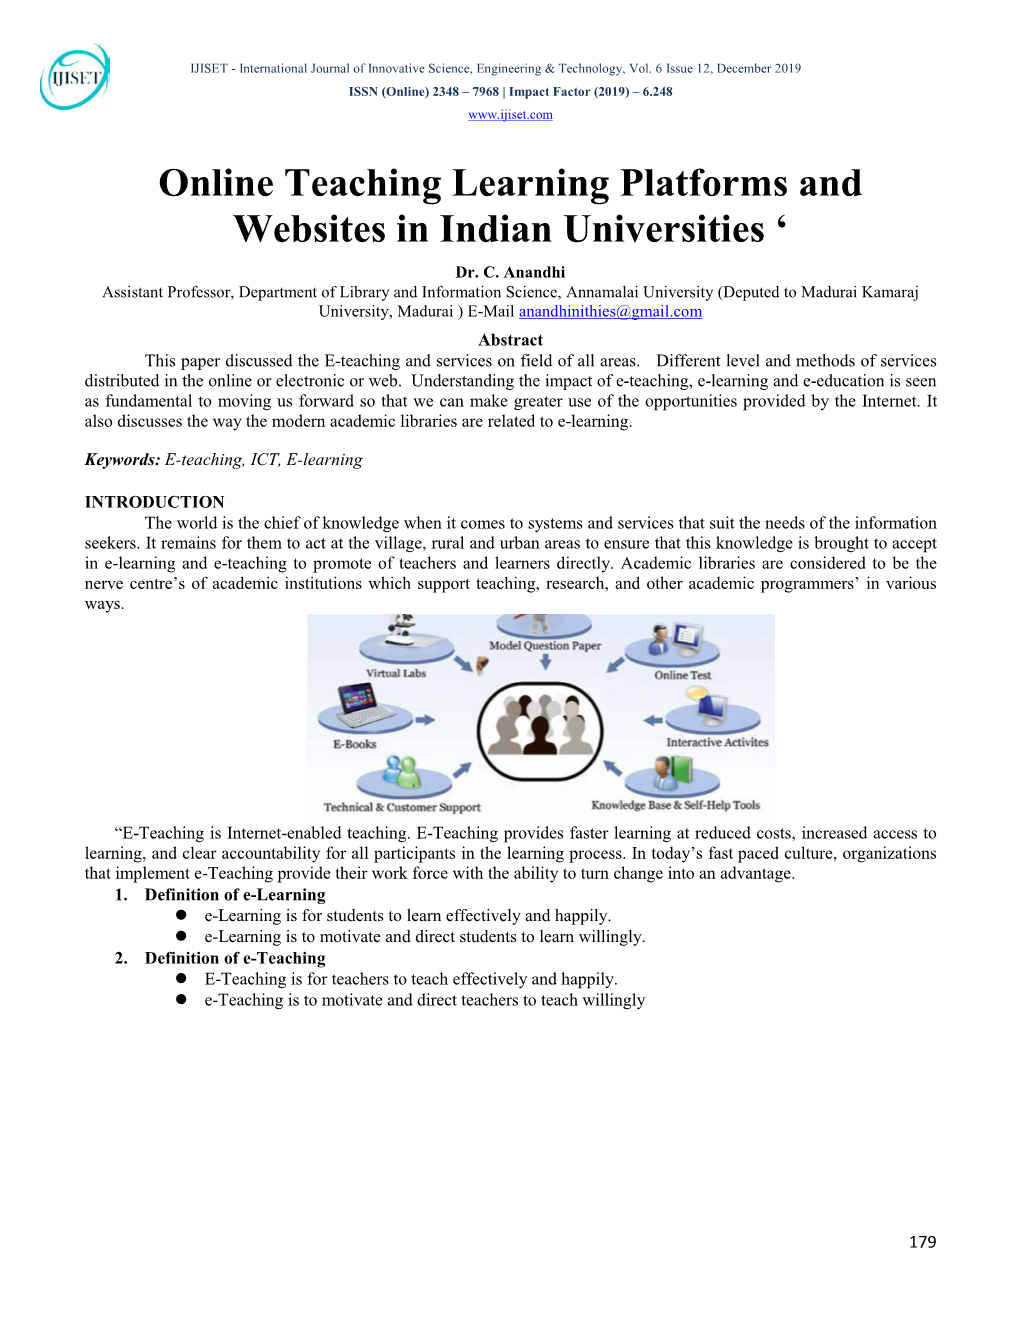 Online Teaching Learning Platforms and Websites in Indian Universities ‘